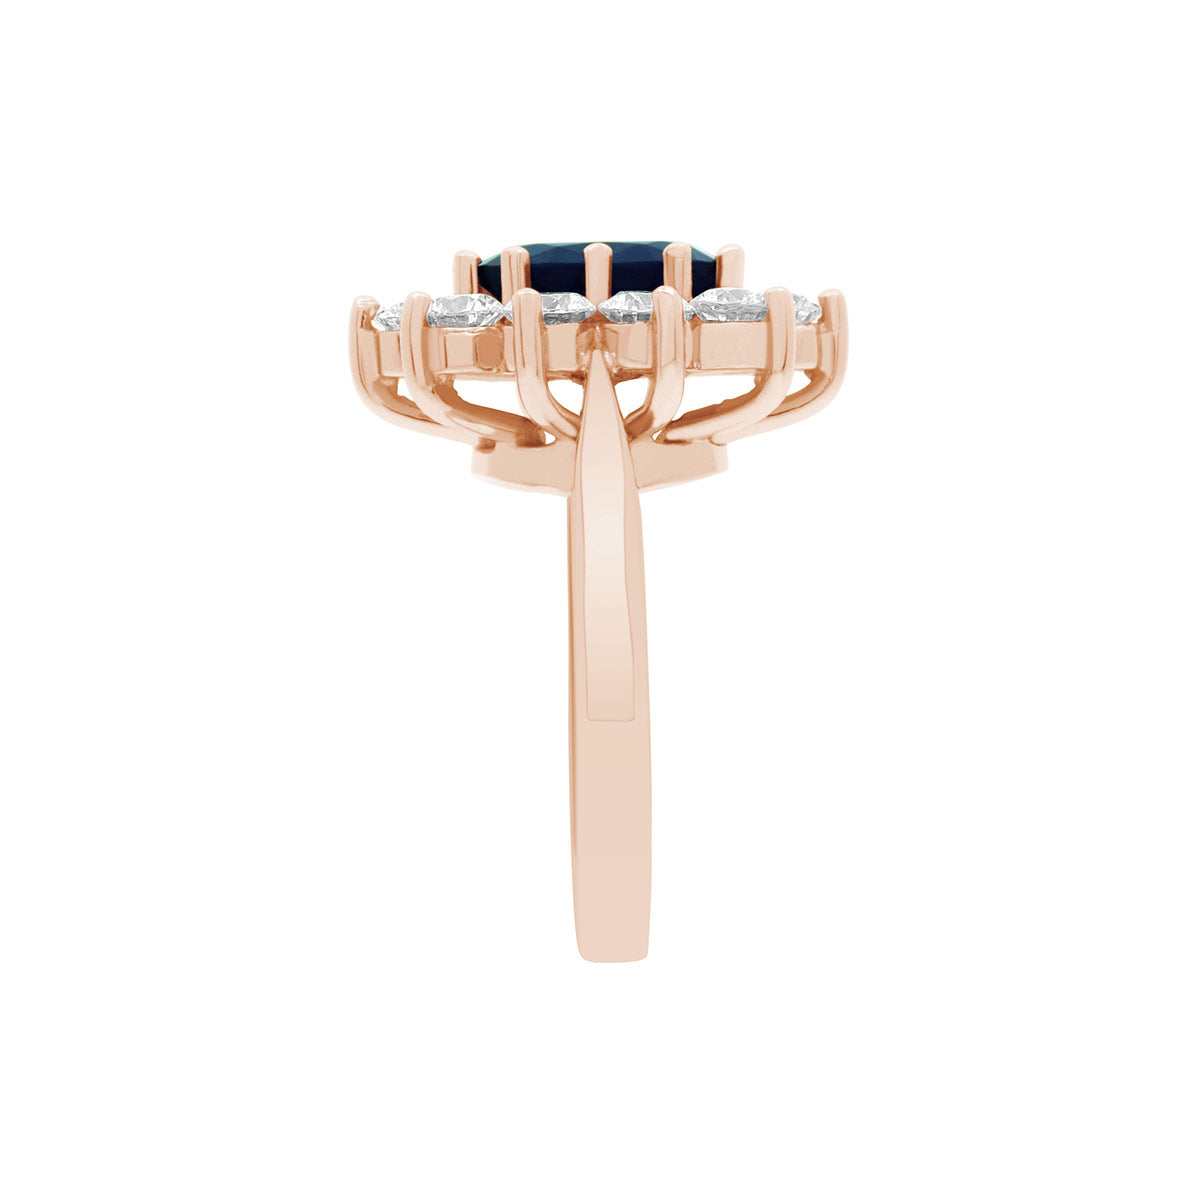 Sapphire Engagement Ring in rose gold with a cluster of sparkling white diamonds upright and viewed from the side